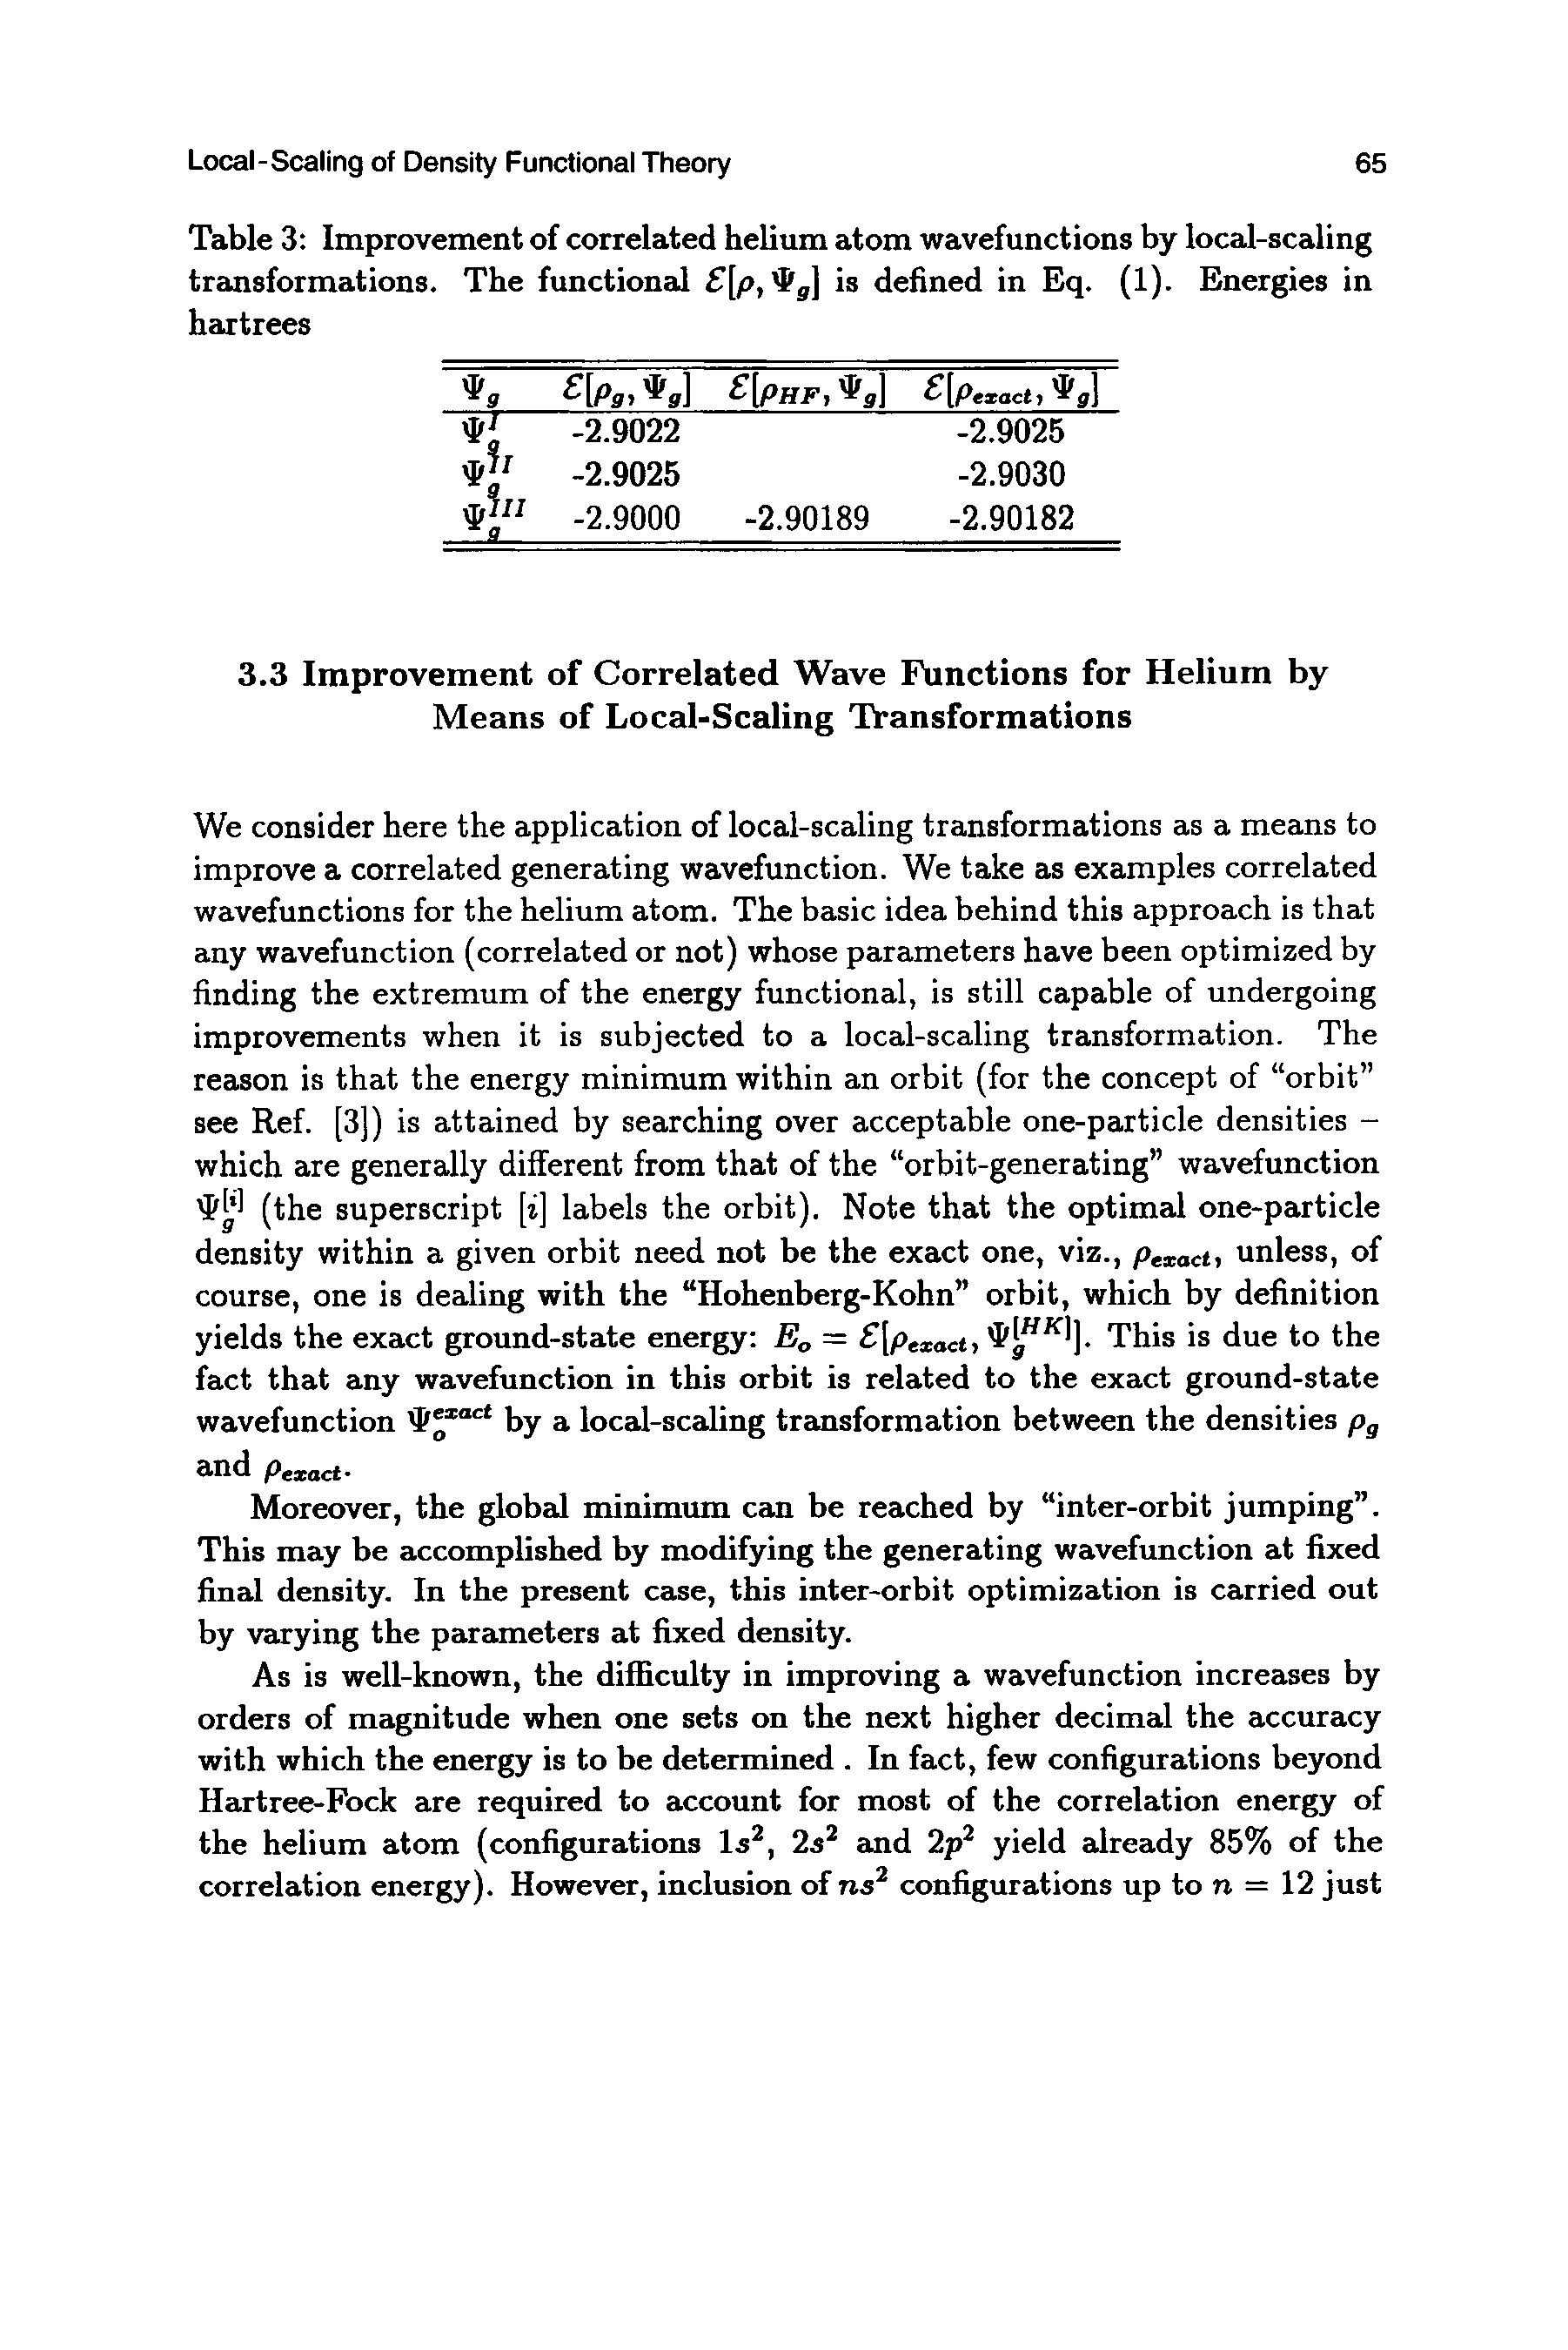 Table 3 Improvement of correlated helium atom wavefunctions by local-scaling transformations. The functional [p, g] is defined in Eq. (1). Energies in hartrees...